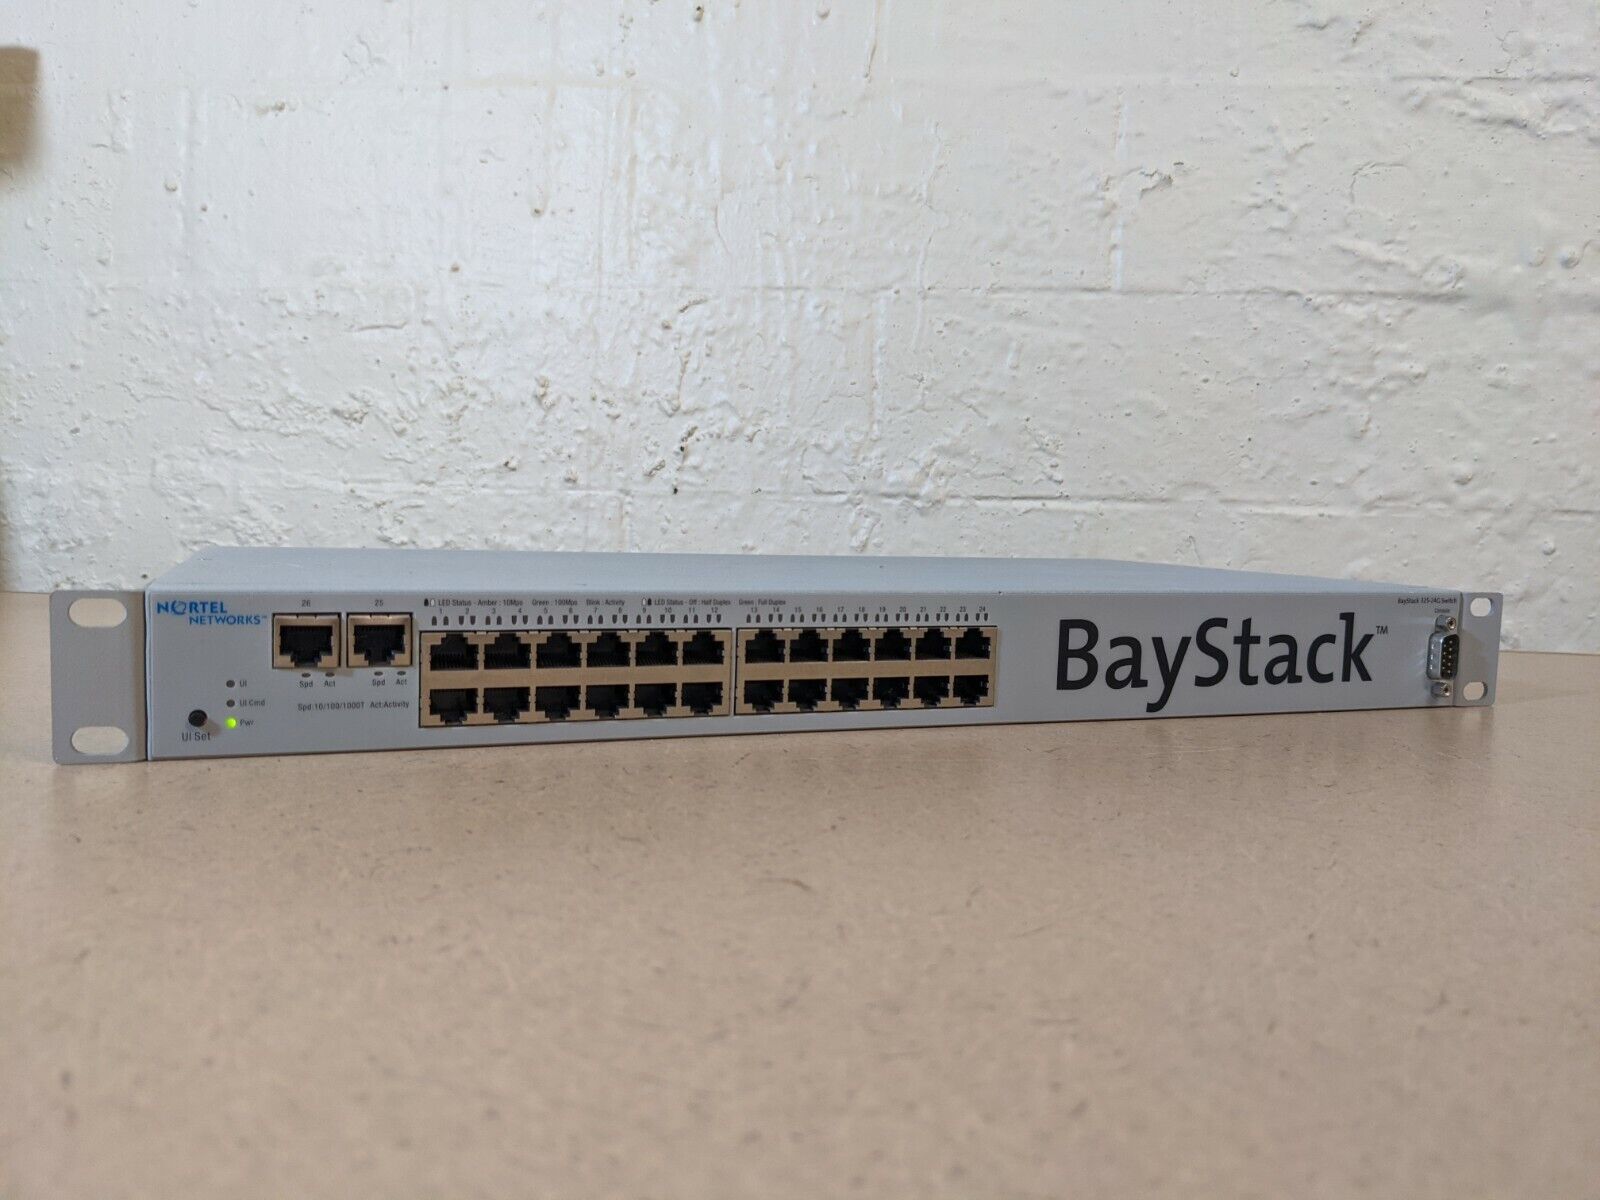 NORTEL NETWORKS BayStack 325-24G Network Switch 24x10/100B-T + Power Cord